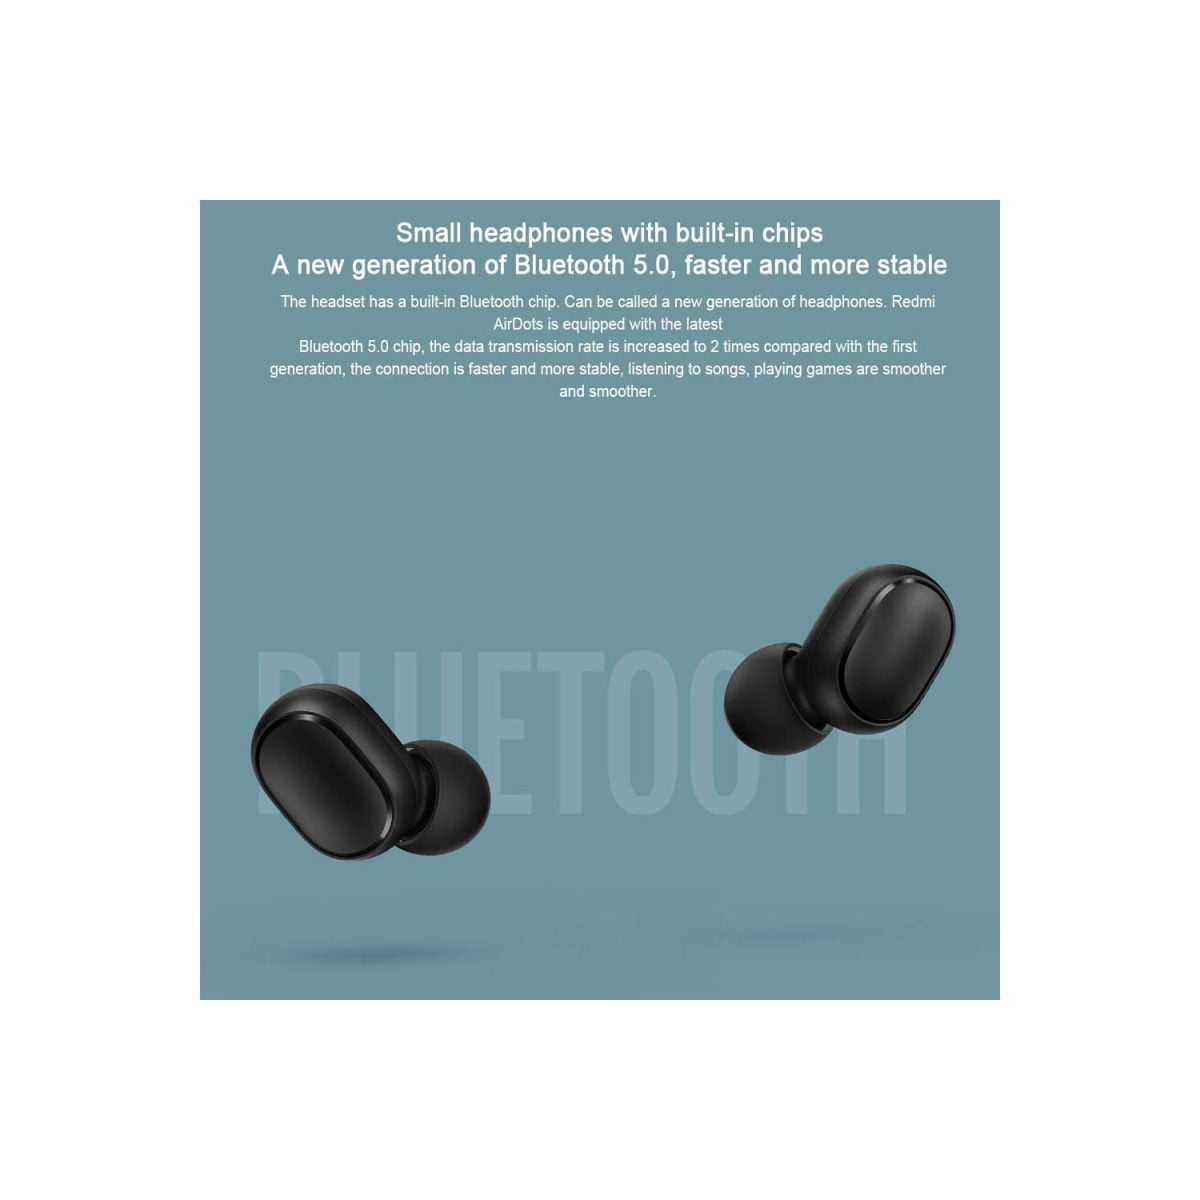 13808976 4 Xiaomi Redmi Airdots Is Equipped With The Latest Bluetooth 5.0 Chip, The Data Transfer Rate Is Up To 2 Times Compared With The Previous Generation, The Connection Is Faster And More Stable. Listening To Songs And Playing Games Are Smoother. Https://Youtu.be/Navo49Ya_Re Xiaomi Xiaomi Earbuds Basic Total-Wireless Earbuds - Black